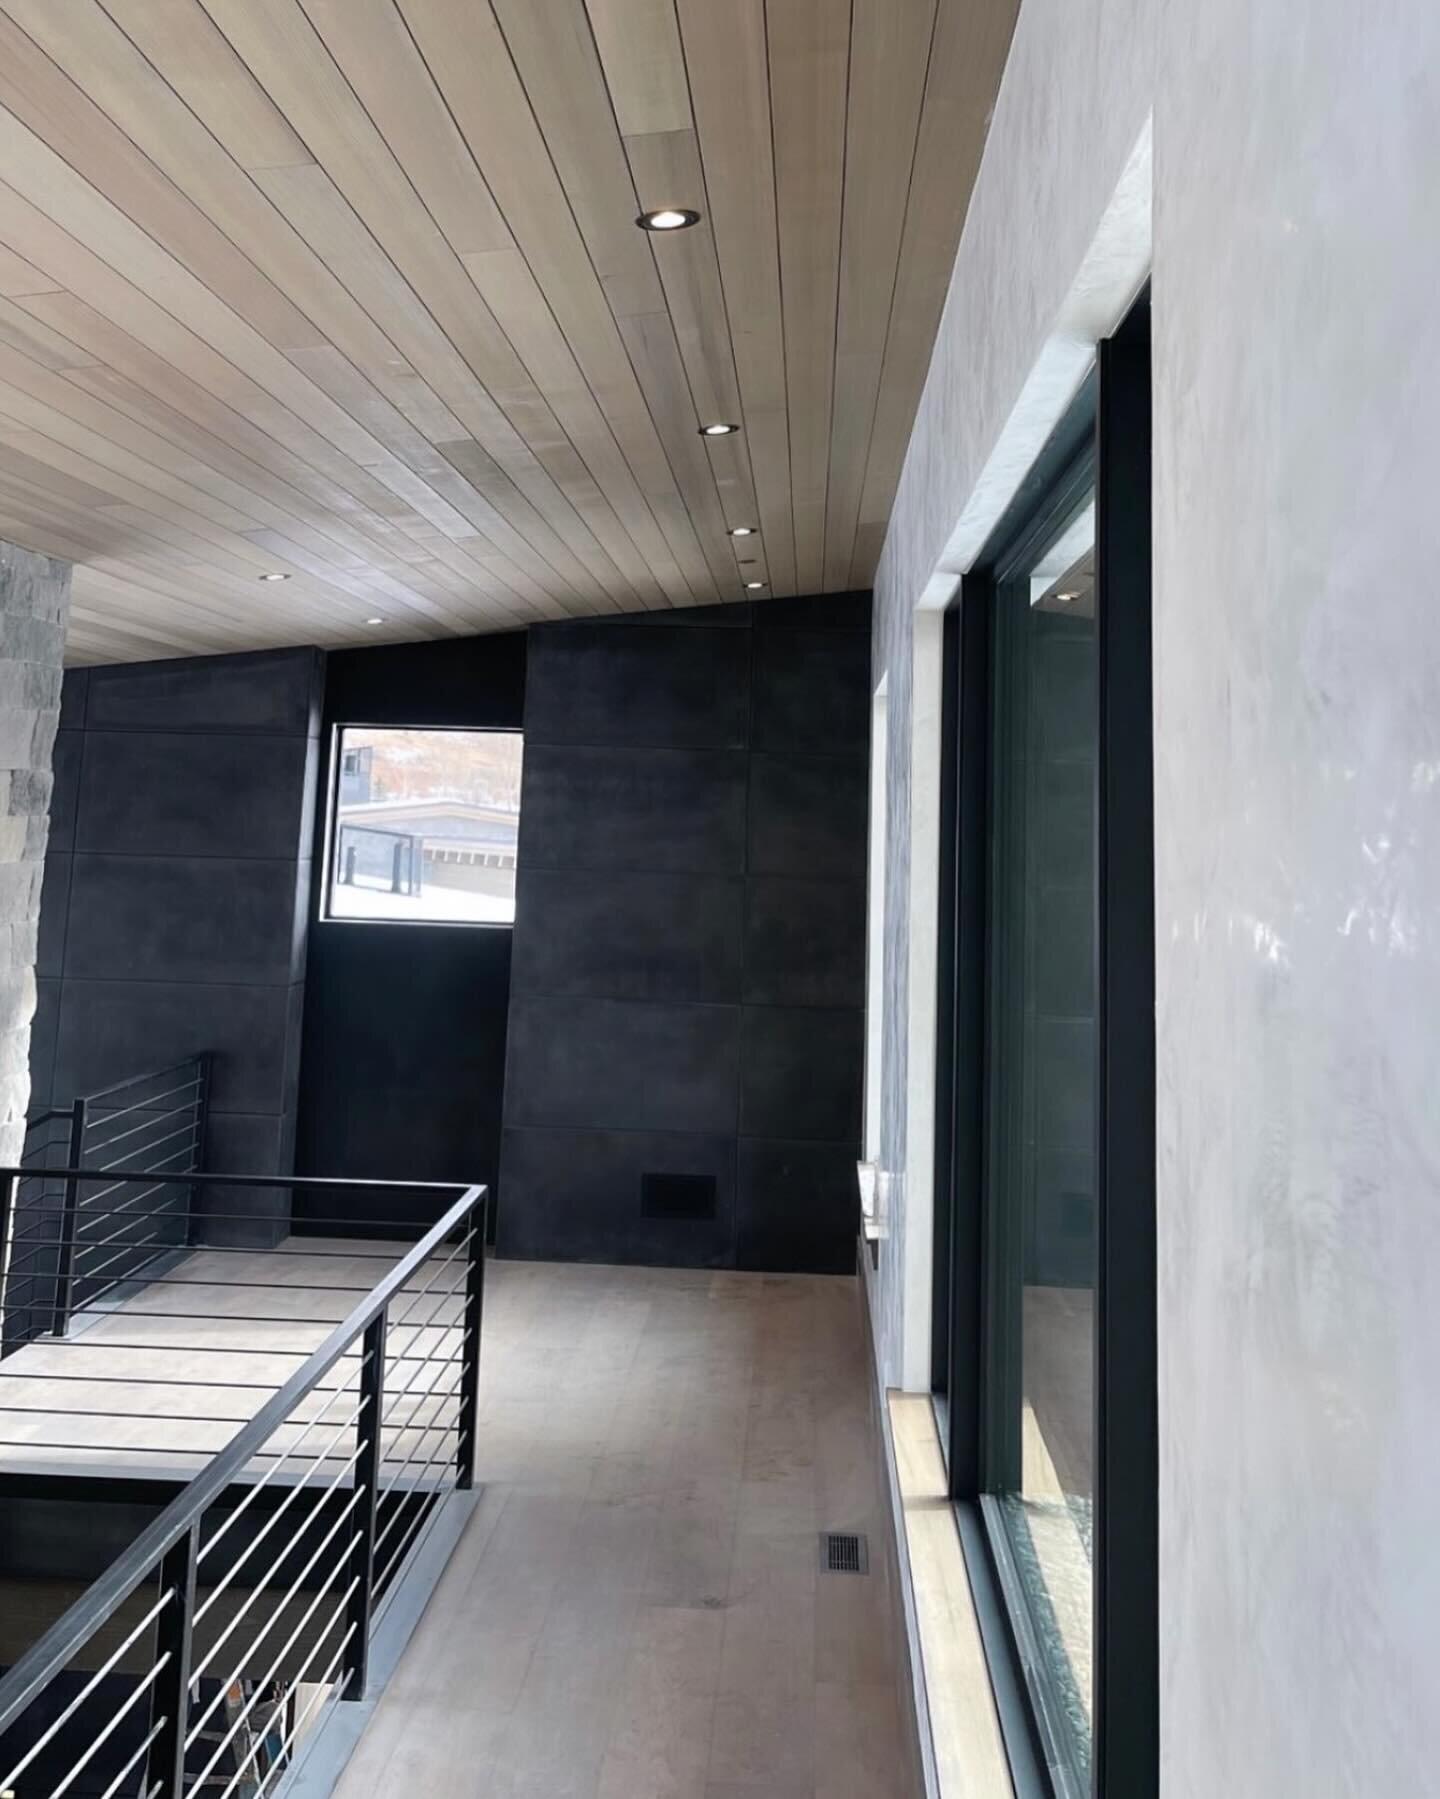 Looking forward to our Bozeman project installation!
The decision to upgrade from painted walls to plaster was a welcome one, and the team @newageartisans got it done. 

#plaster #upgrade #luxe #finishes #interiordesign #chic #texture #homedecor #tea